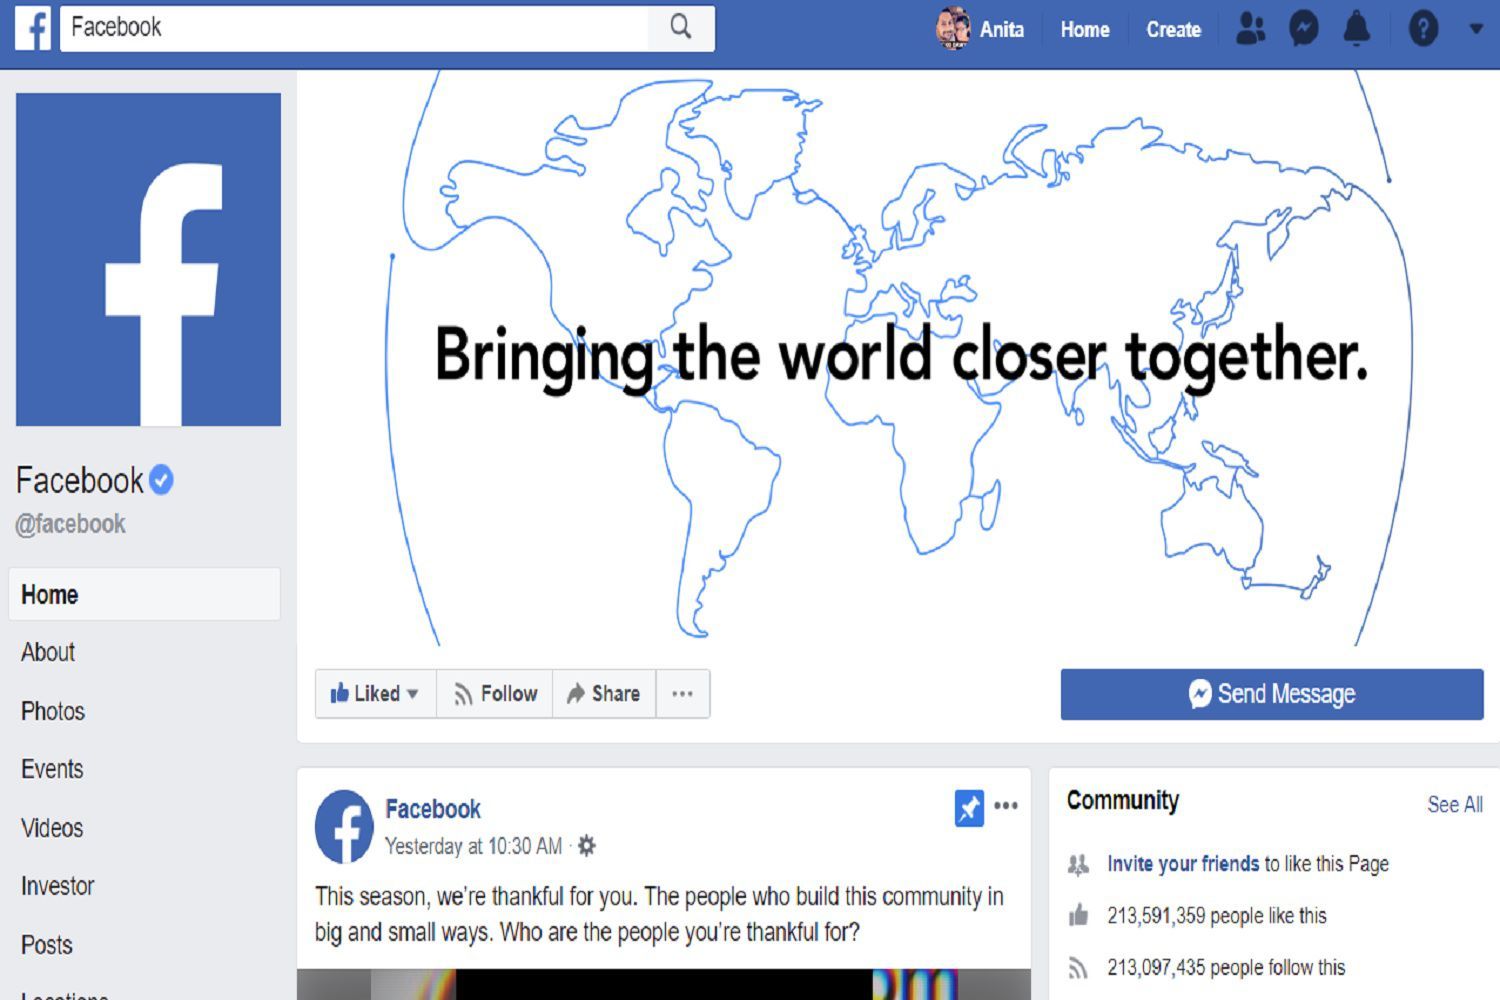 Скриншот Facebook's company Facebook page that shows a button that customers can click to send a Facebook chat message to the company.